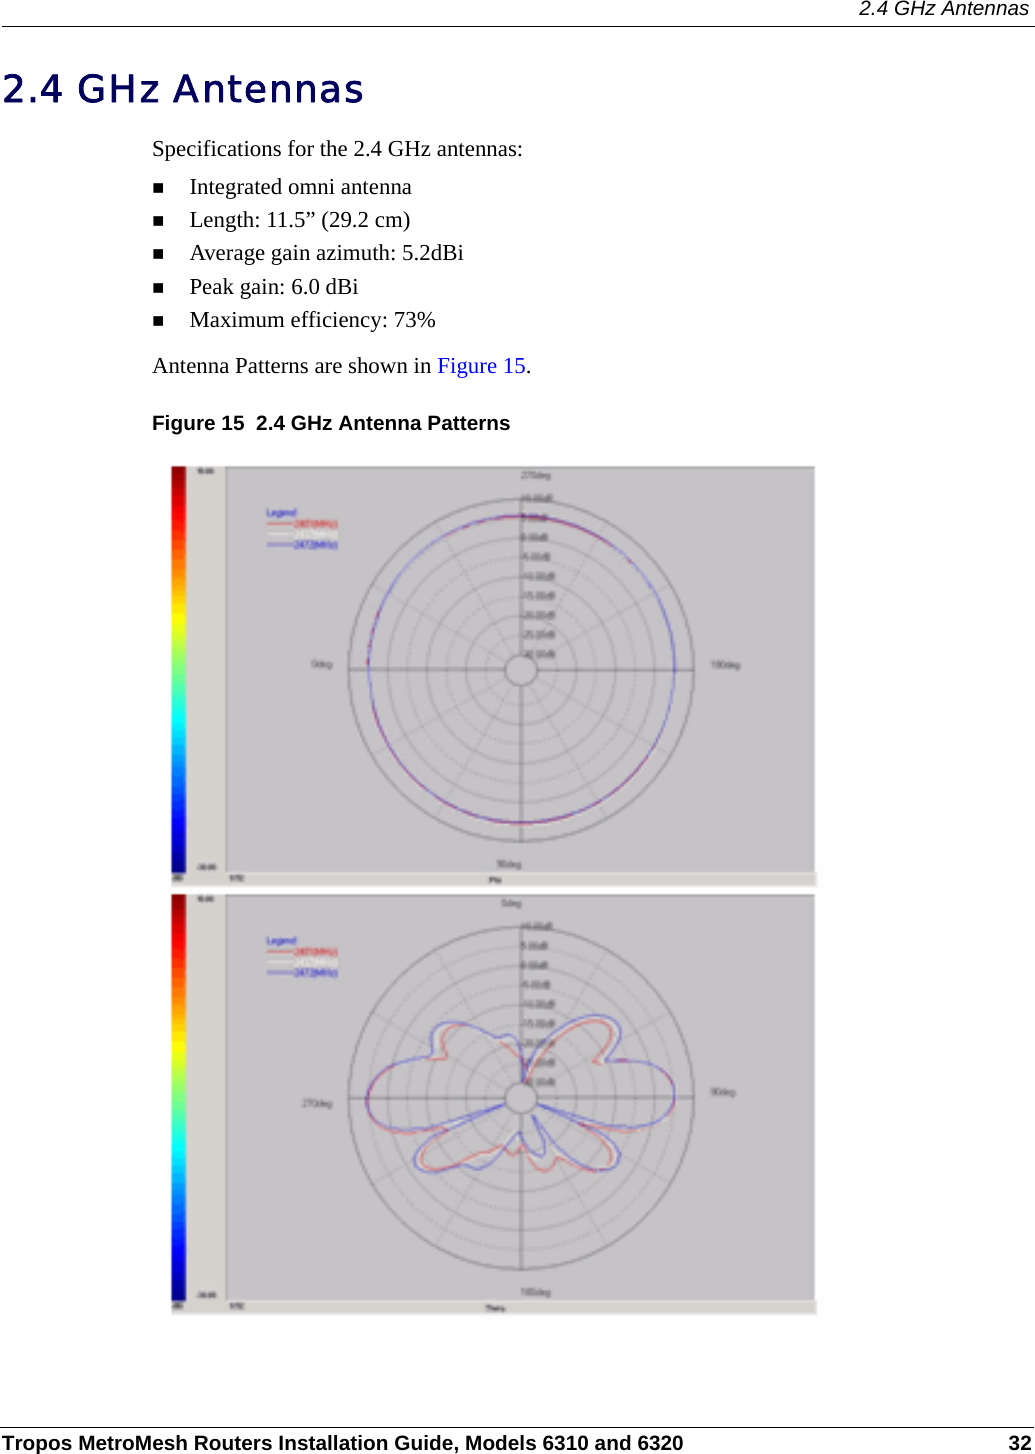 2.4 GHz AntennasTropos MetroMesh Routers Installation Guide, Models 6310 and 6320 322.4 GHz AntennasSpecifications for the 2.4 GHz antennas:Integrated omni antennaLength: 11.5” (29.2 cm)Average gain azimuth: 5.2dBiPeak gain: 6.0 dBiMaximum efficiency: 73% Antenna Patterns are shown in Figure 15.Figure 15  2.4 GHz Antenna Patterns